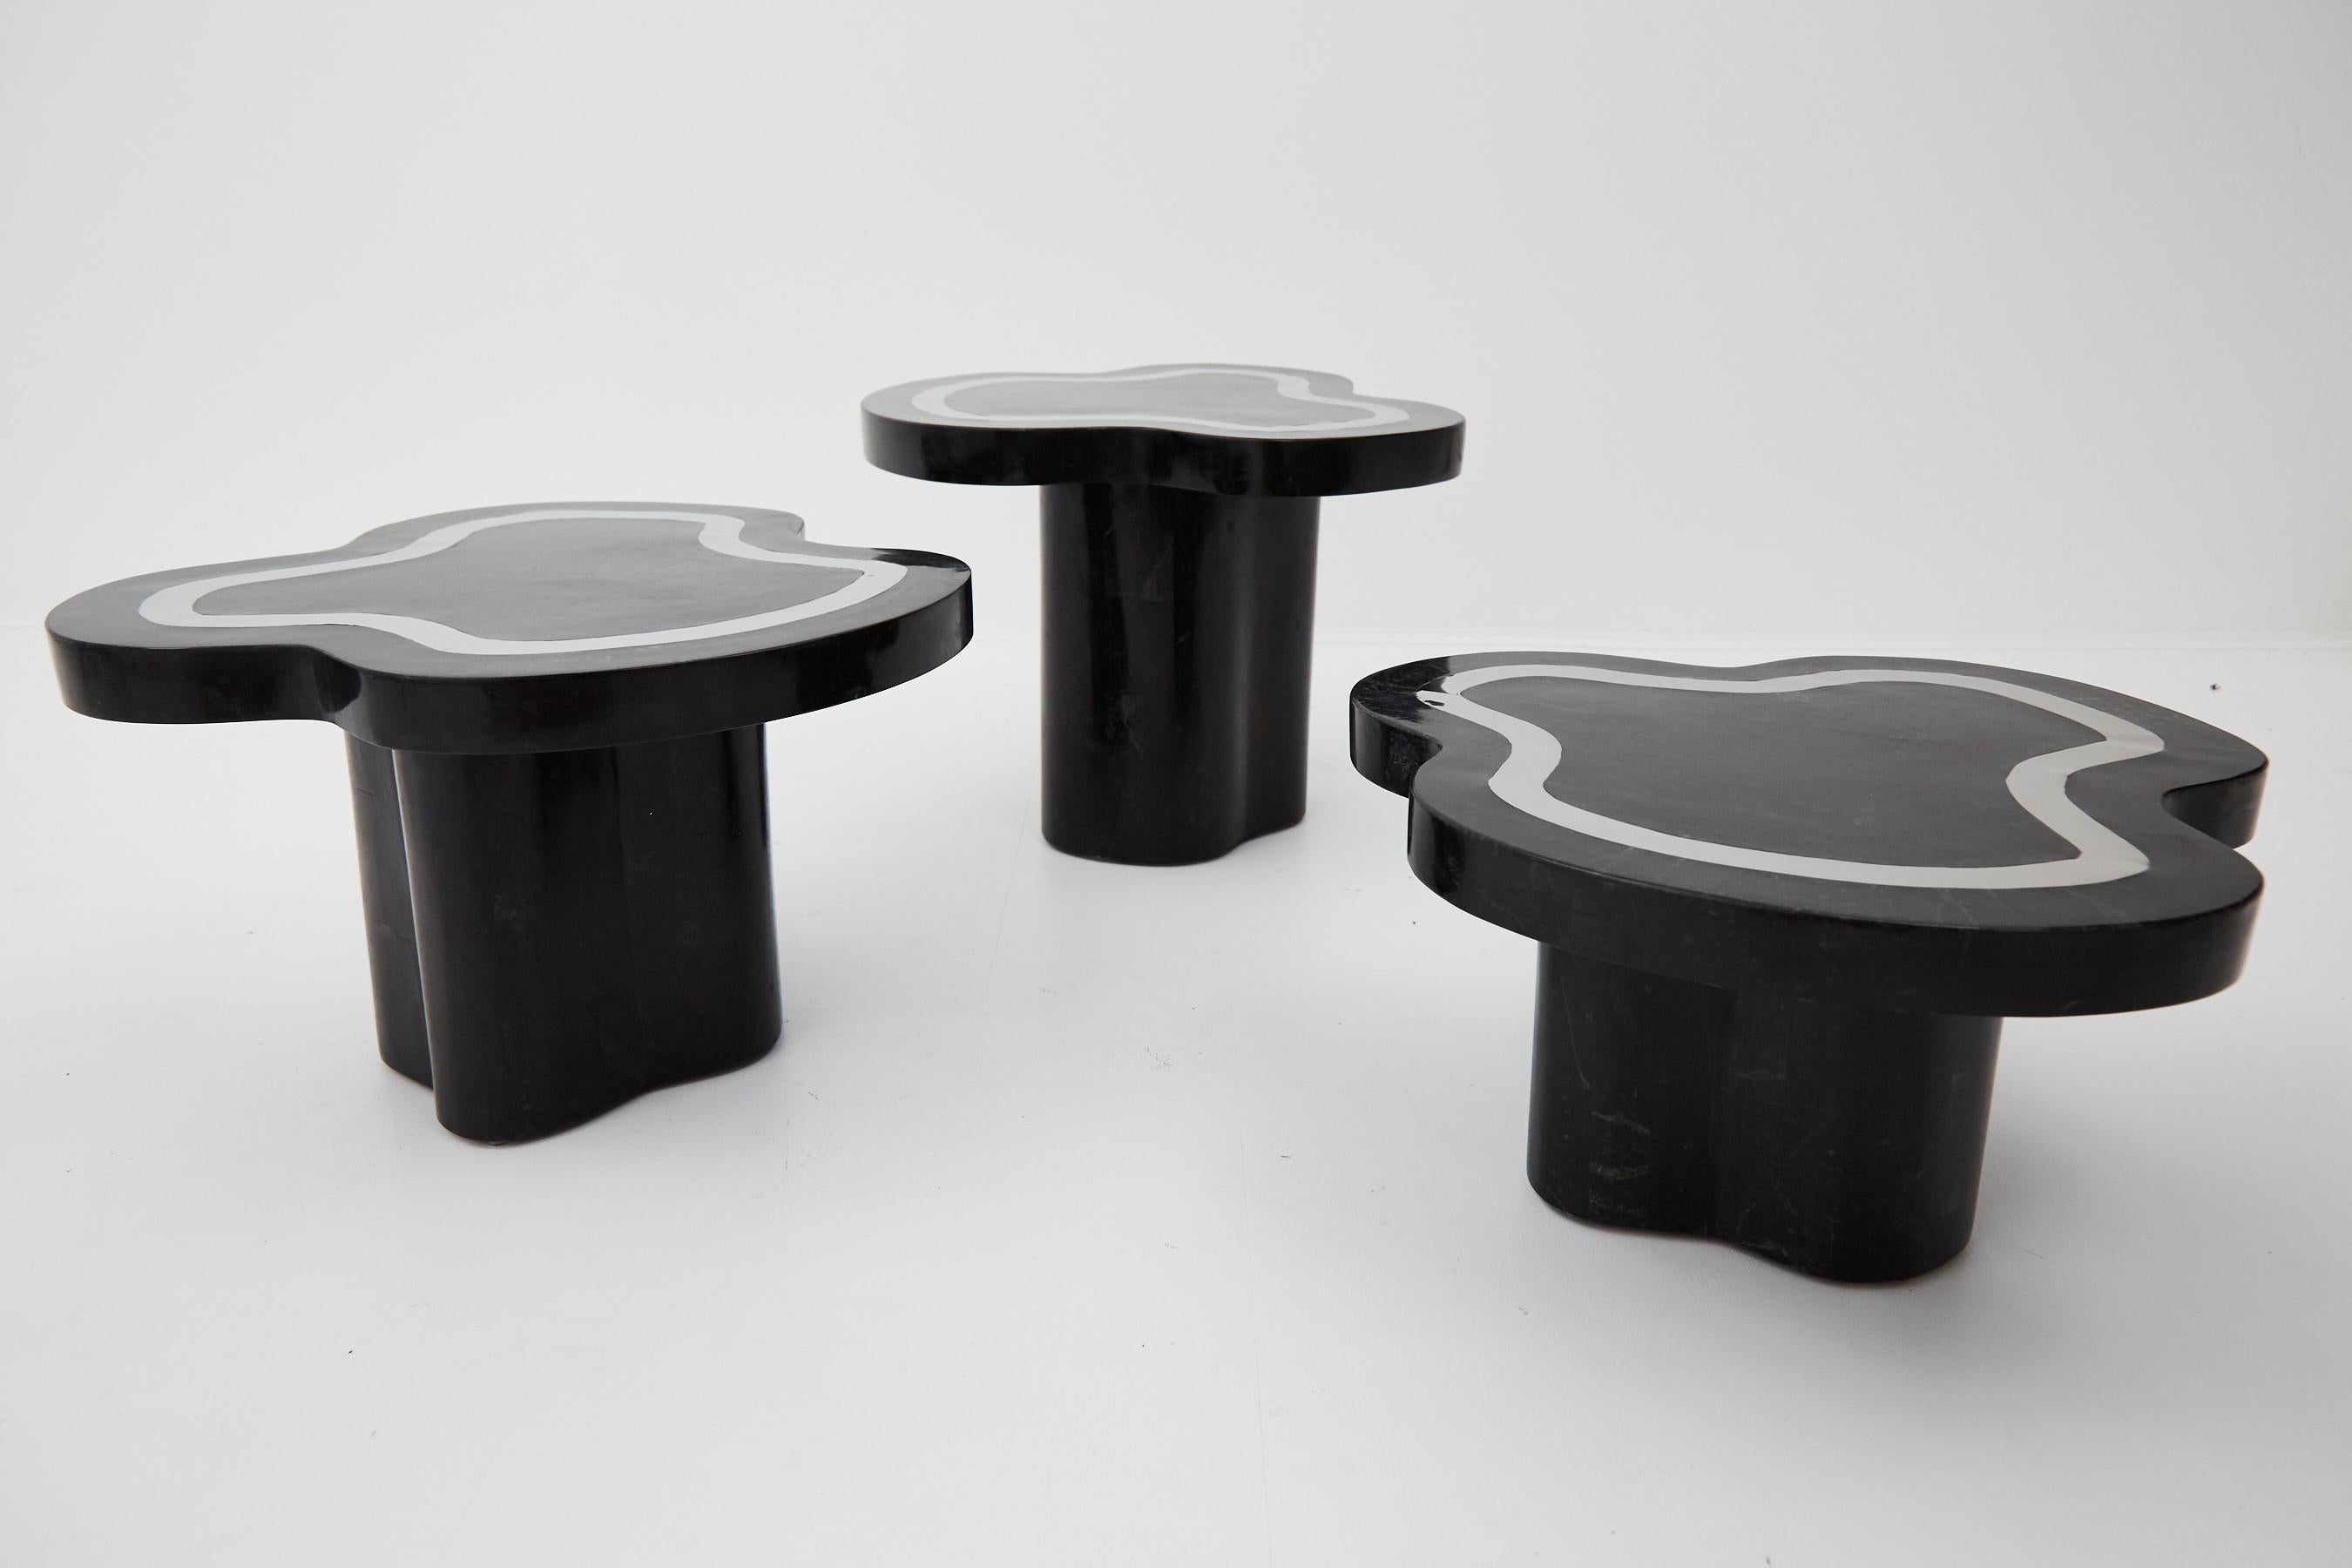 Thai Water Mushroom Tables, Black Stone with Stainless Steel, Set of Three, 1990s For Sale